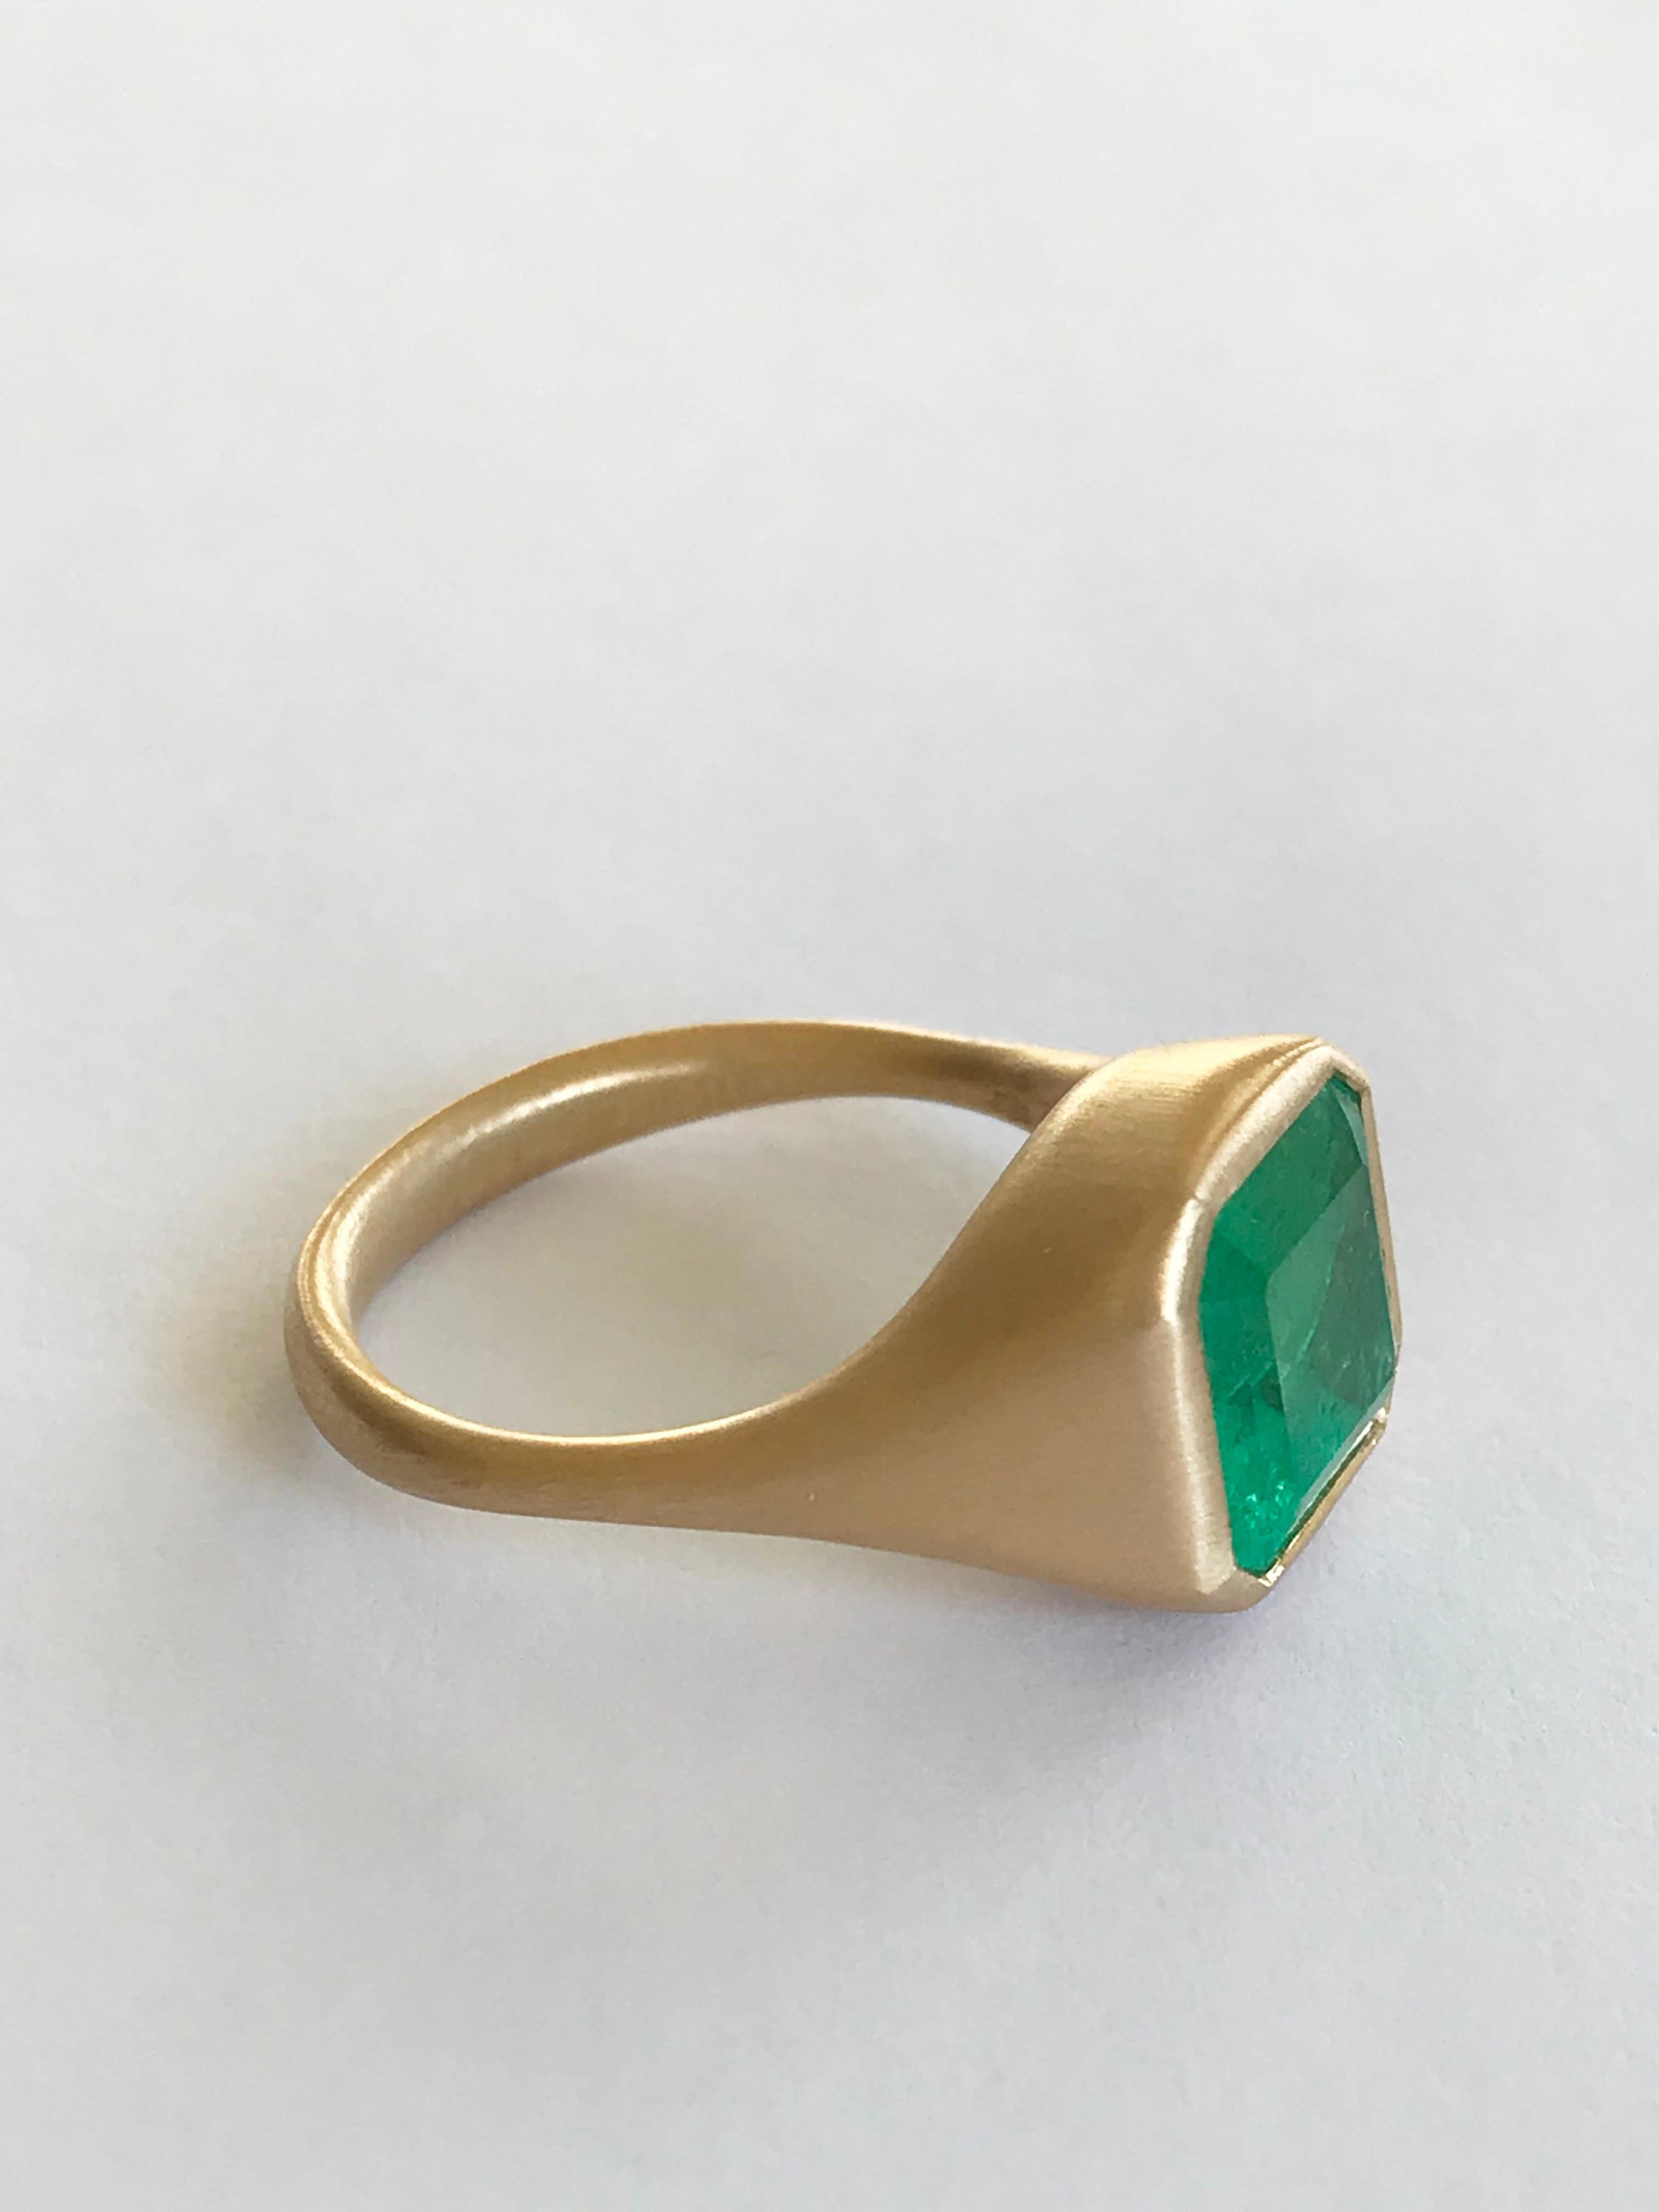 Dalben 4, 12 Carat Colombian Emerald Yellow Gold Ring For Sale 3